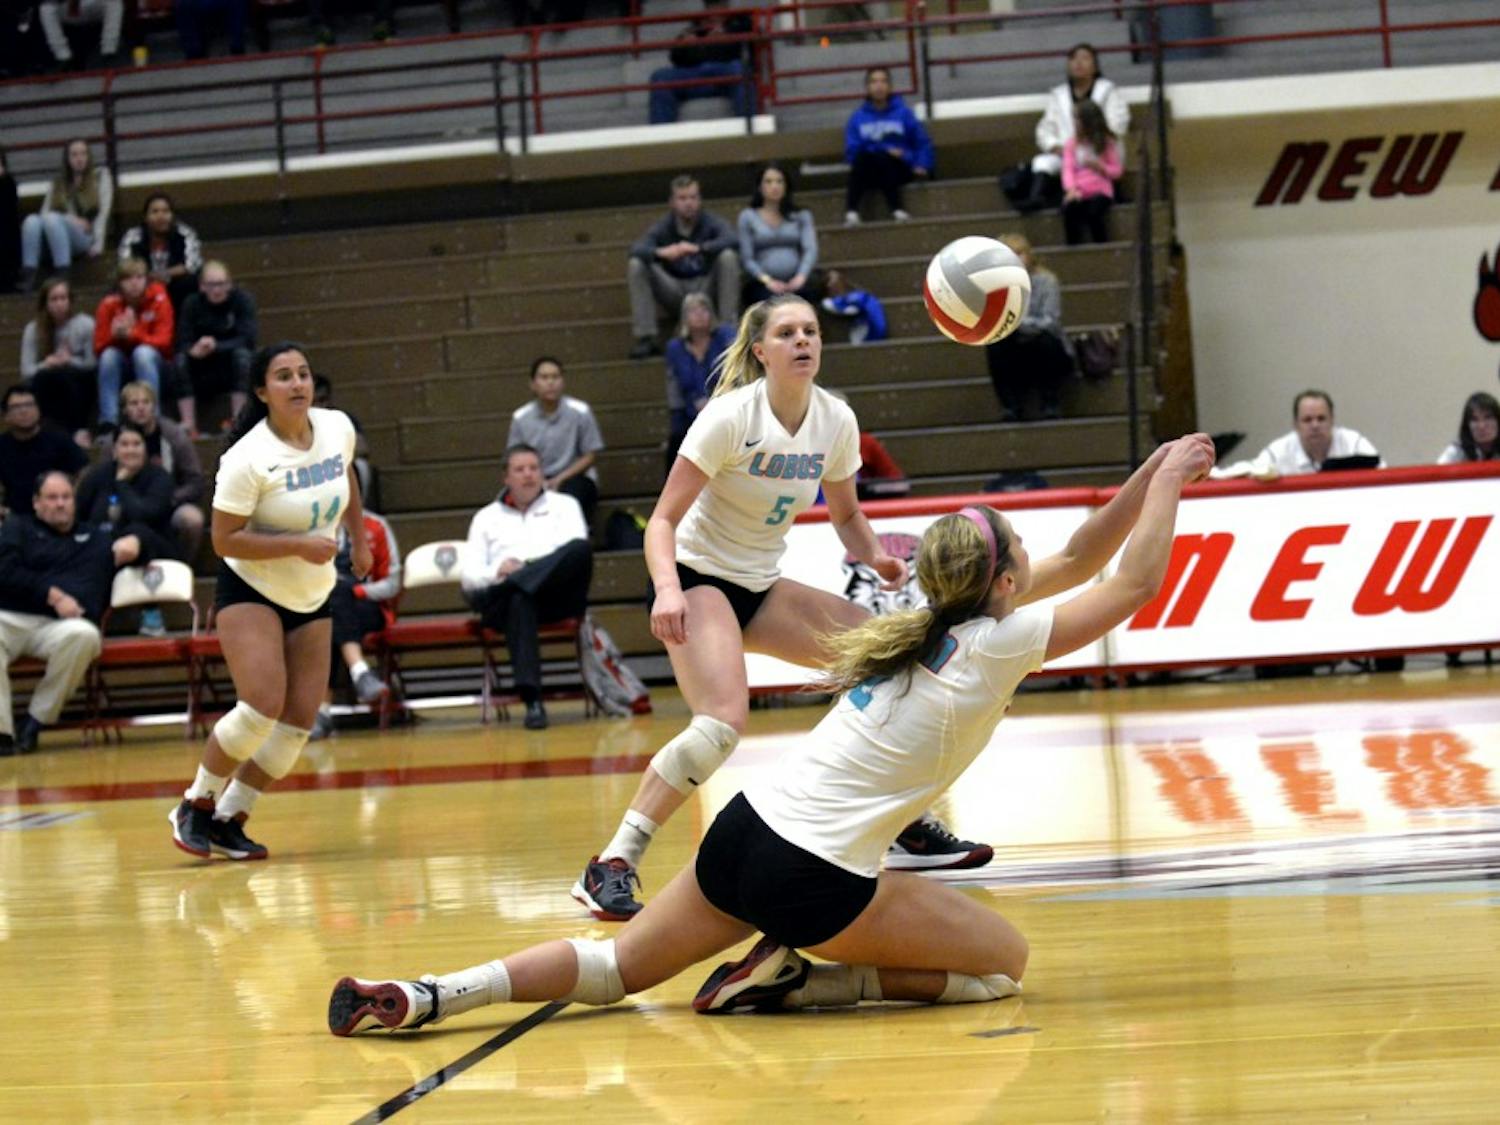 Setter Hannah Johnson digs the ball off of an Air Force attack at Johnson Center Tuesday, Oct. 27, 2015. The Lobos beat Air Force 3-0 and play San Jose Thursday Oct. 29.&nbsp;